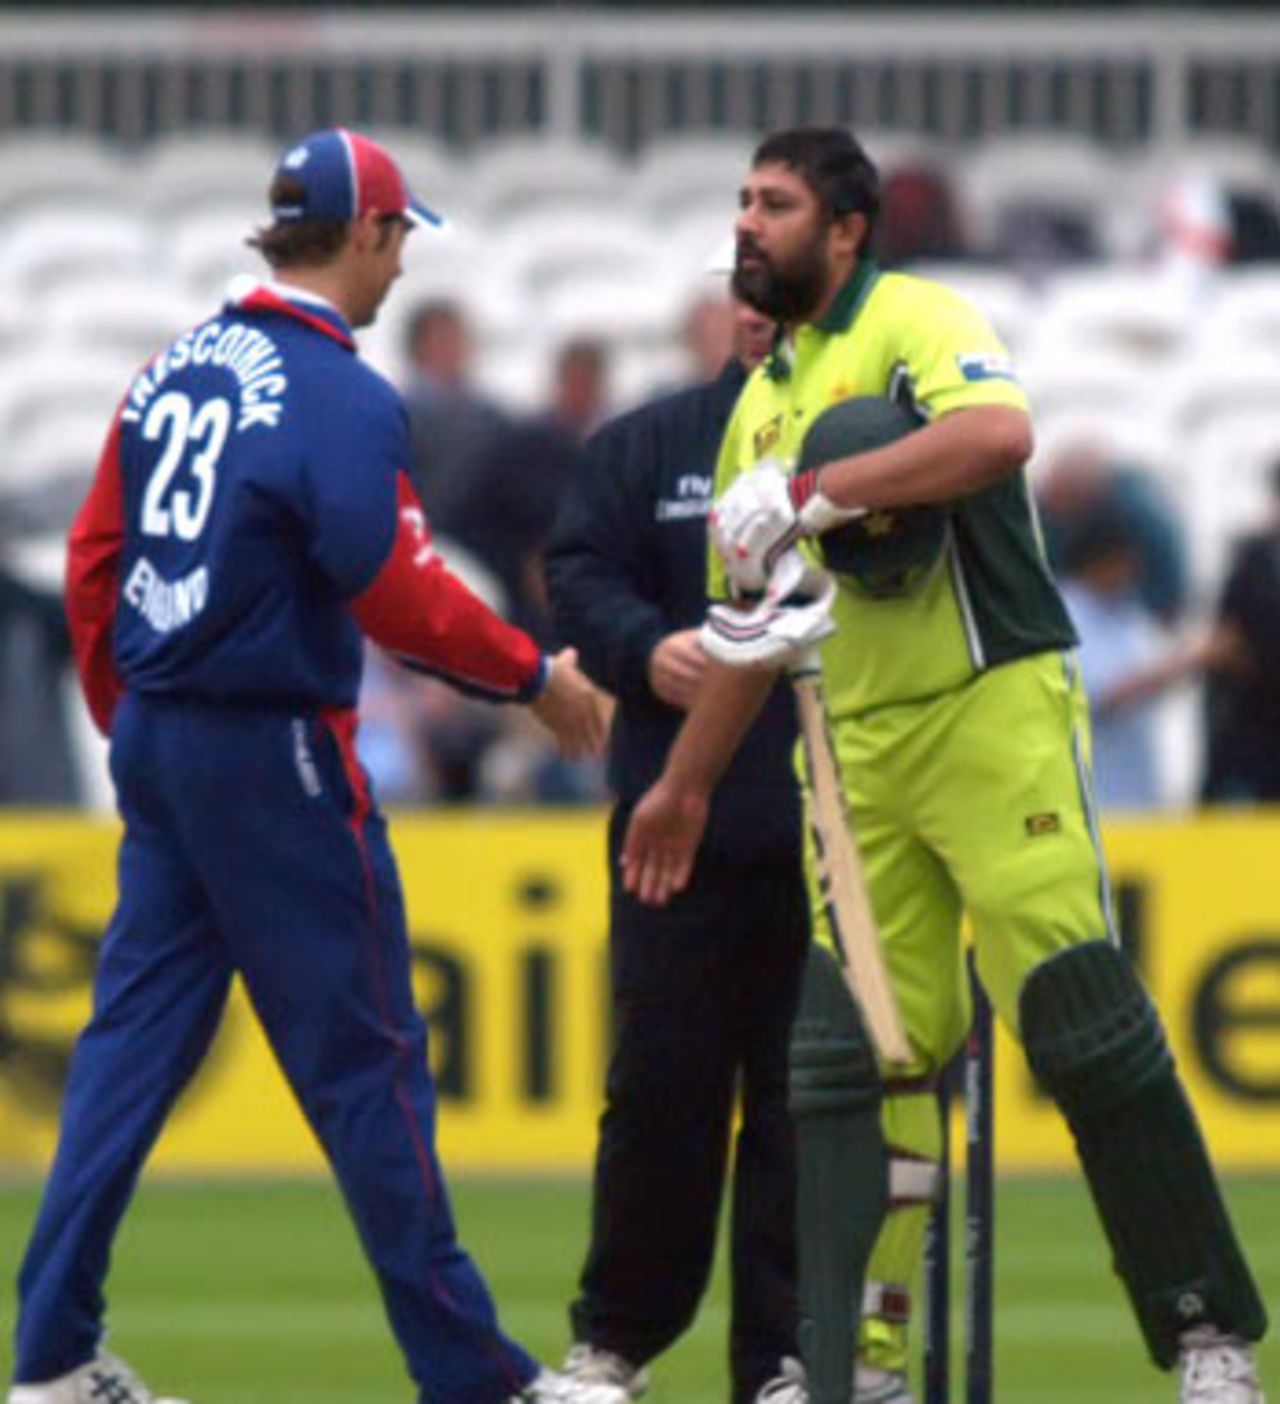 Inzamam-ul-Haq is congratulated by Marcus Trescothick after Pakistan's win, England v Pakistan, 2nd ODI, Lord's, September 2, 2006